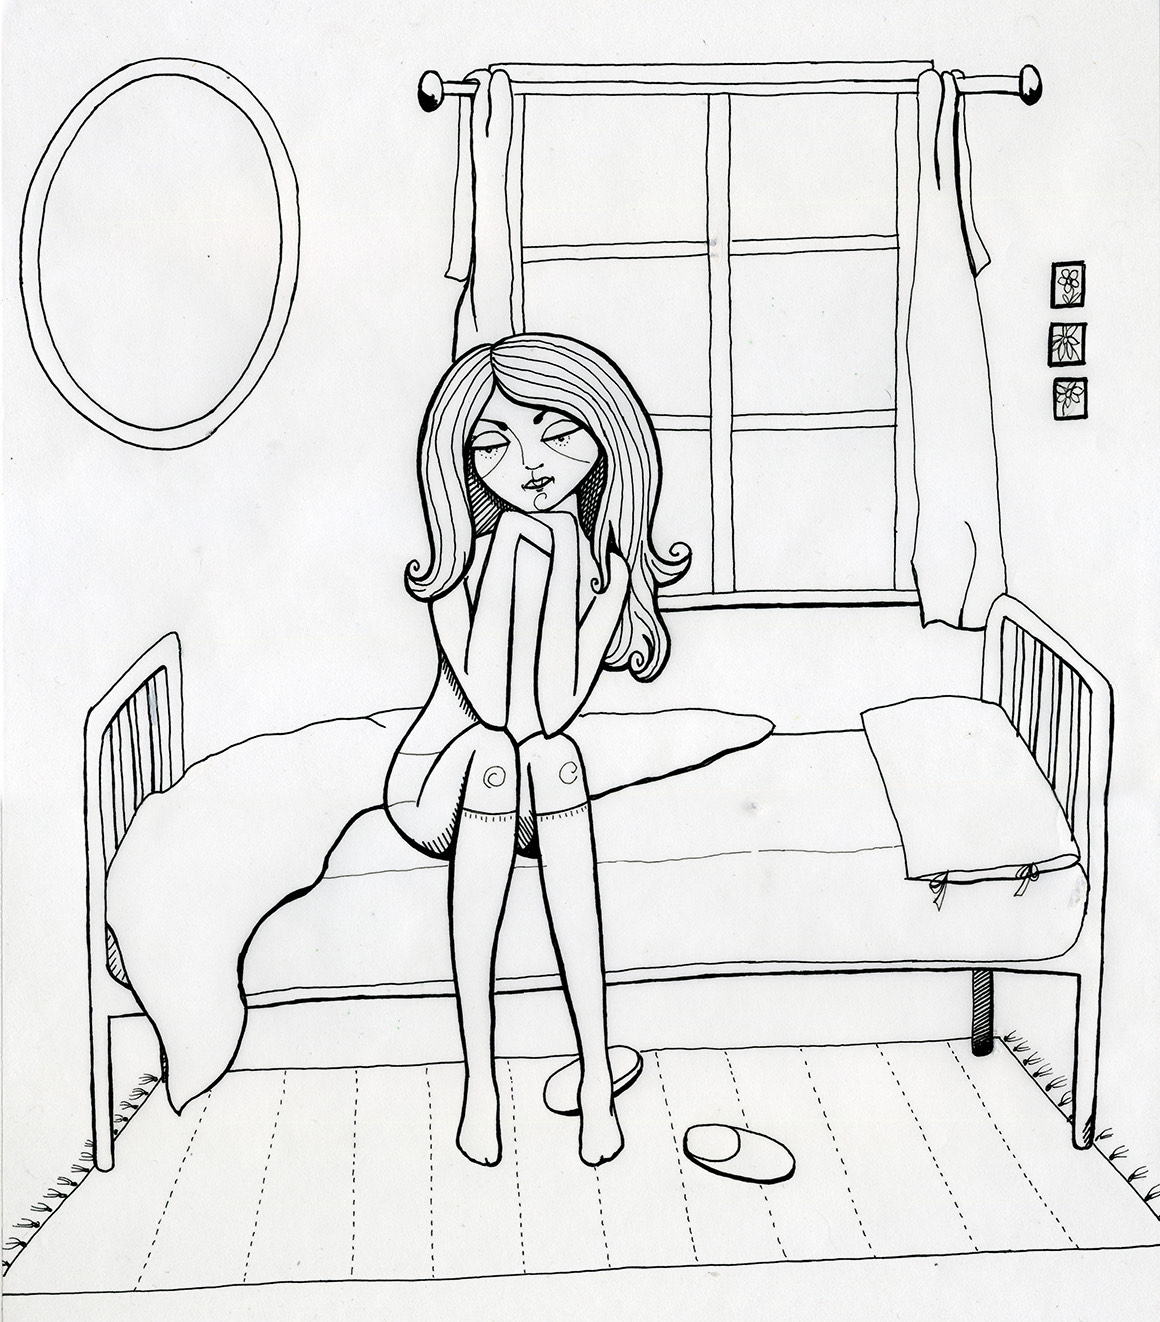 A detailed inked illustration a woman sitting on a bed in her underwear.